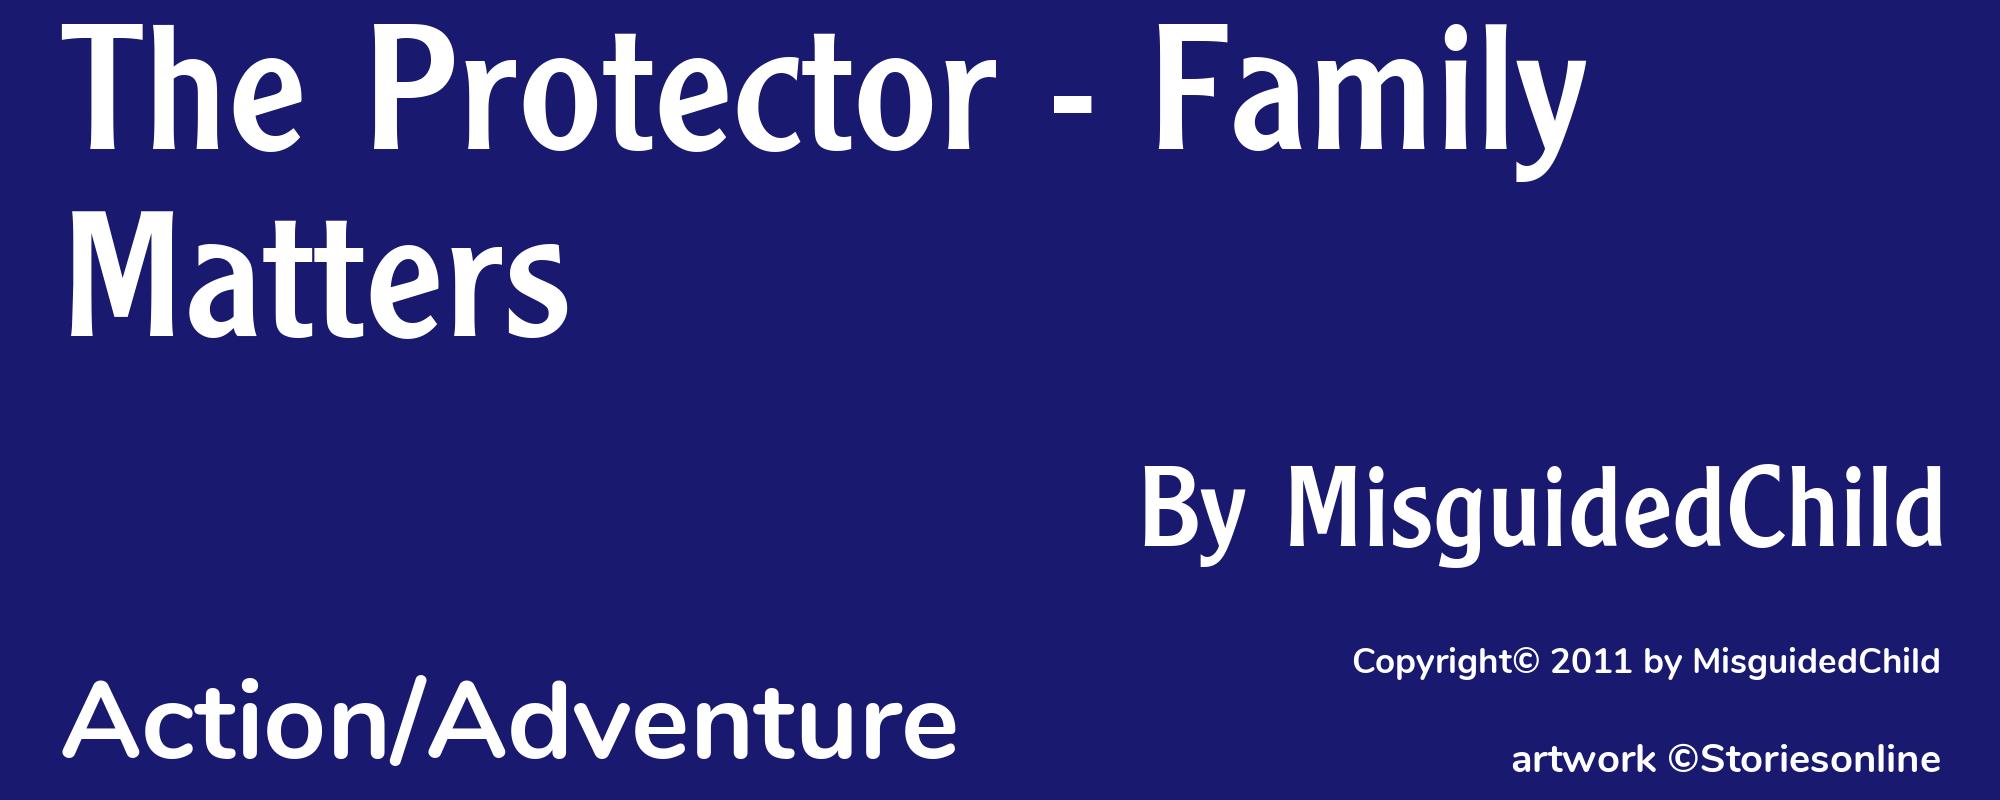 The Protector - Family Matters - Cover